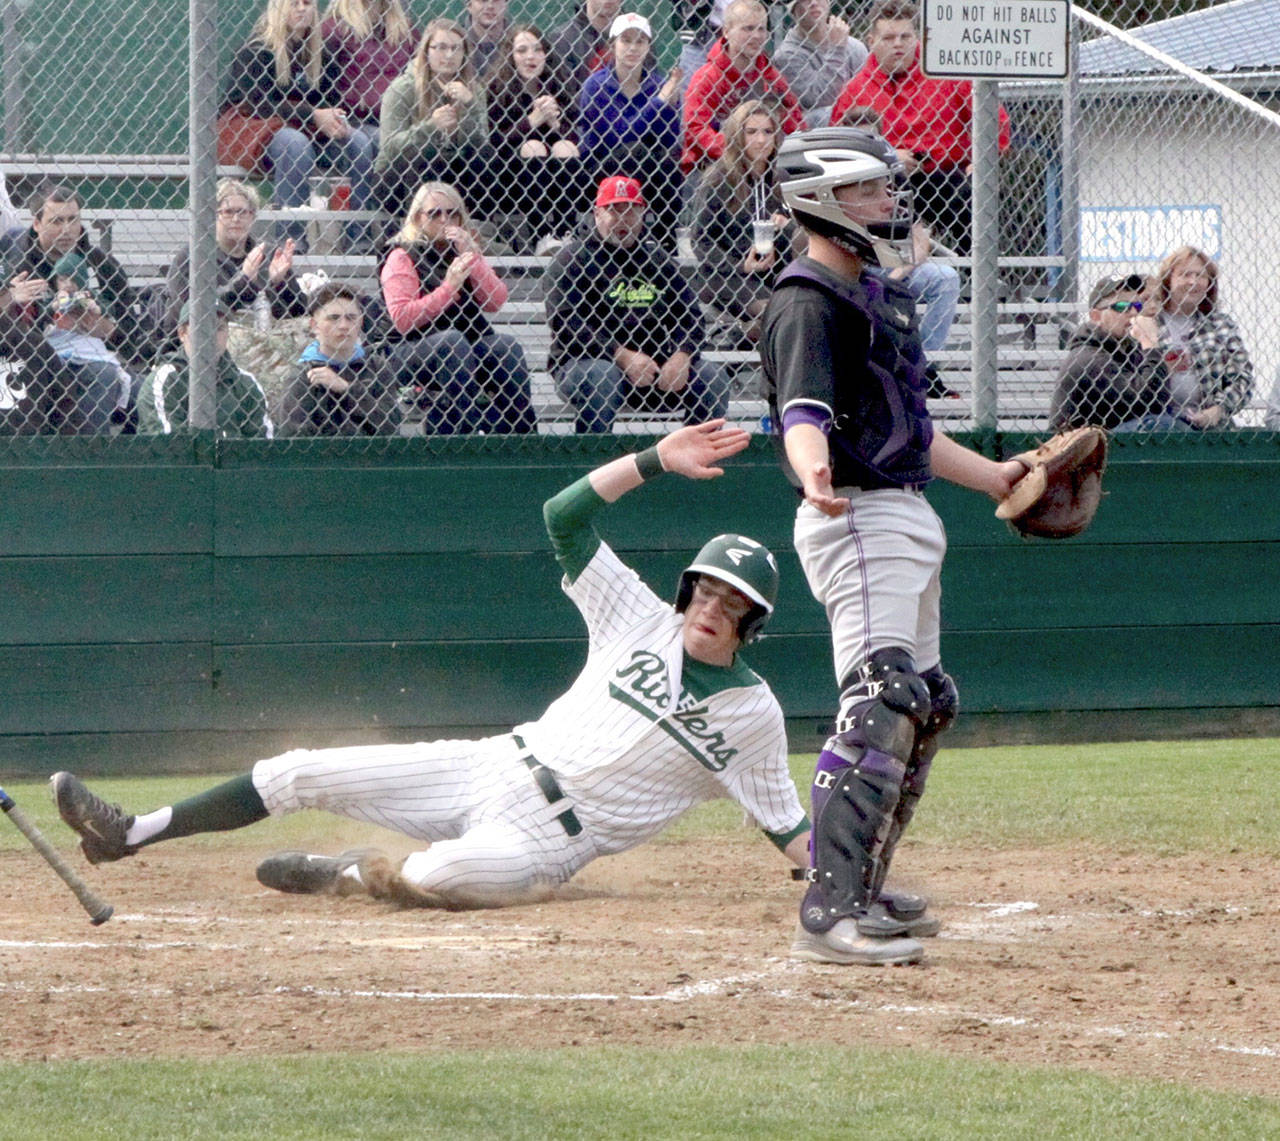 Luke Angevine slides safely into home as the second run of the game for PA as the NK catcher Carson Bower stands waiting for the ball as if to say - give me the ball.